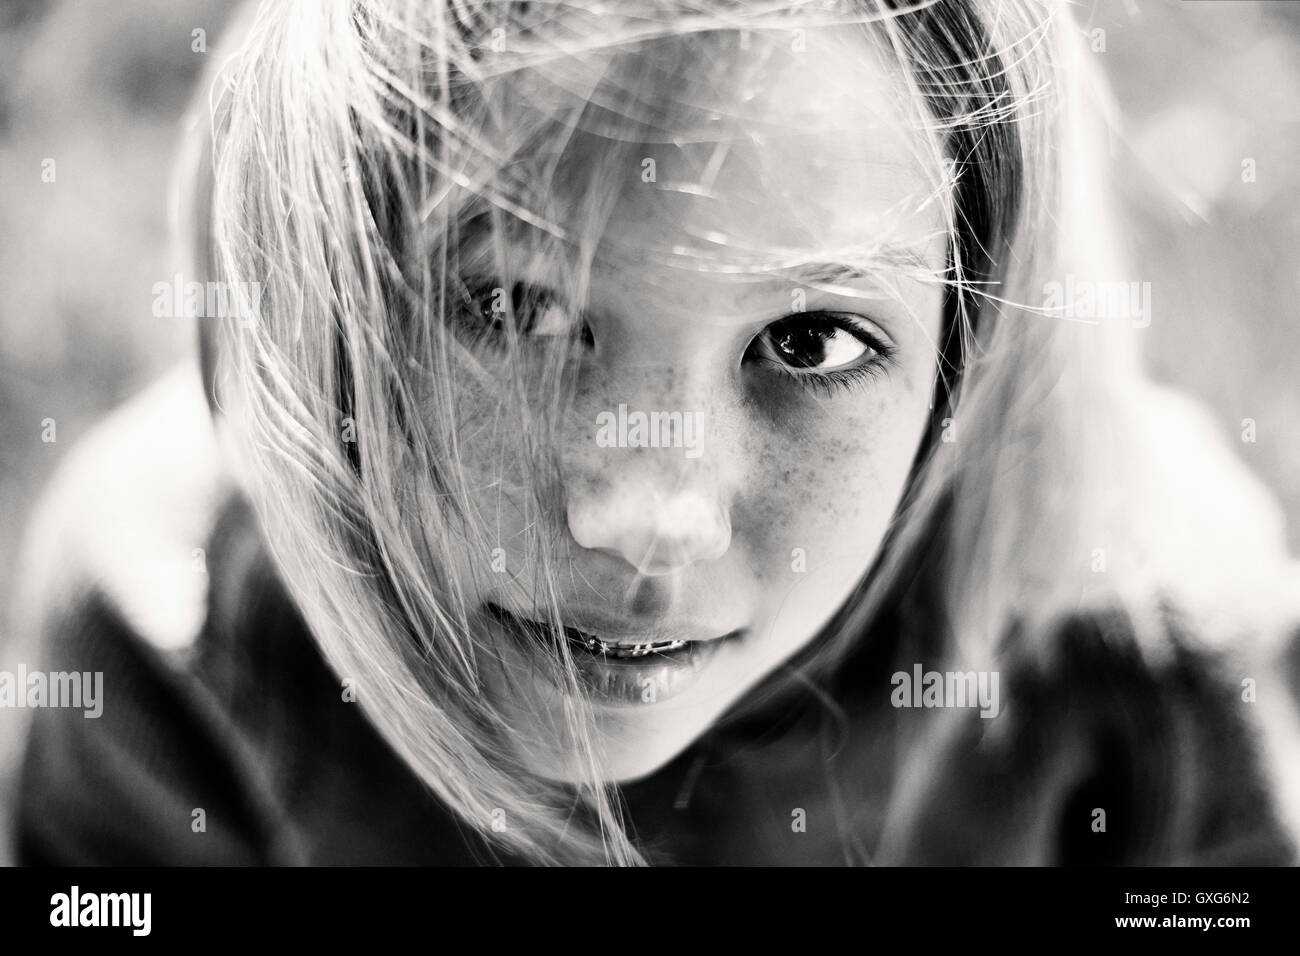 Hair of Caucasian girl with braces blowing in wind Stock Photo